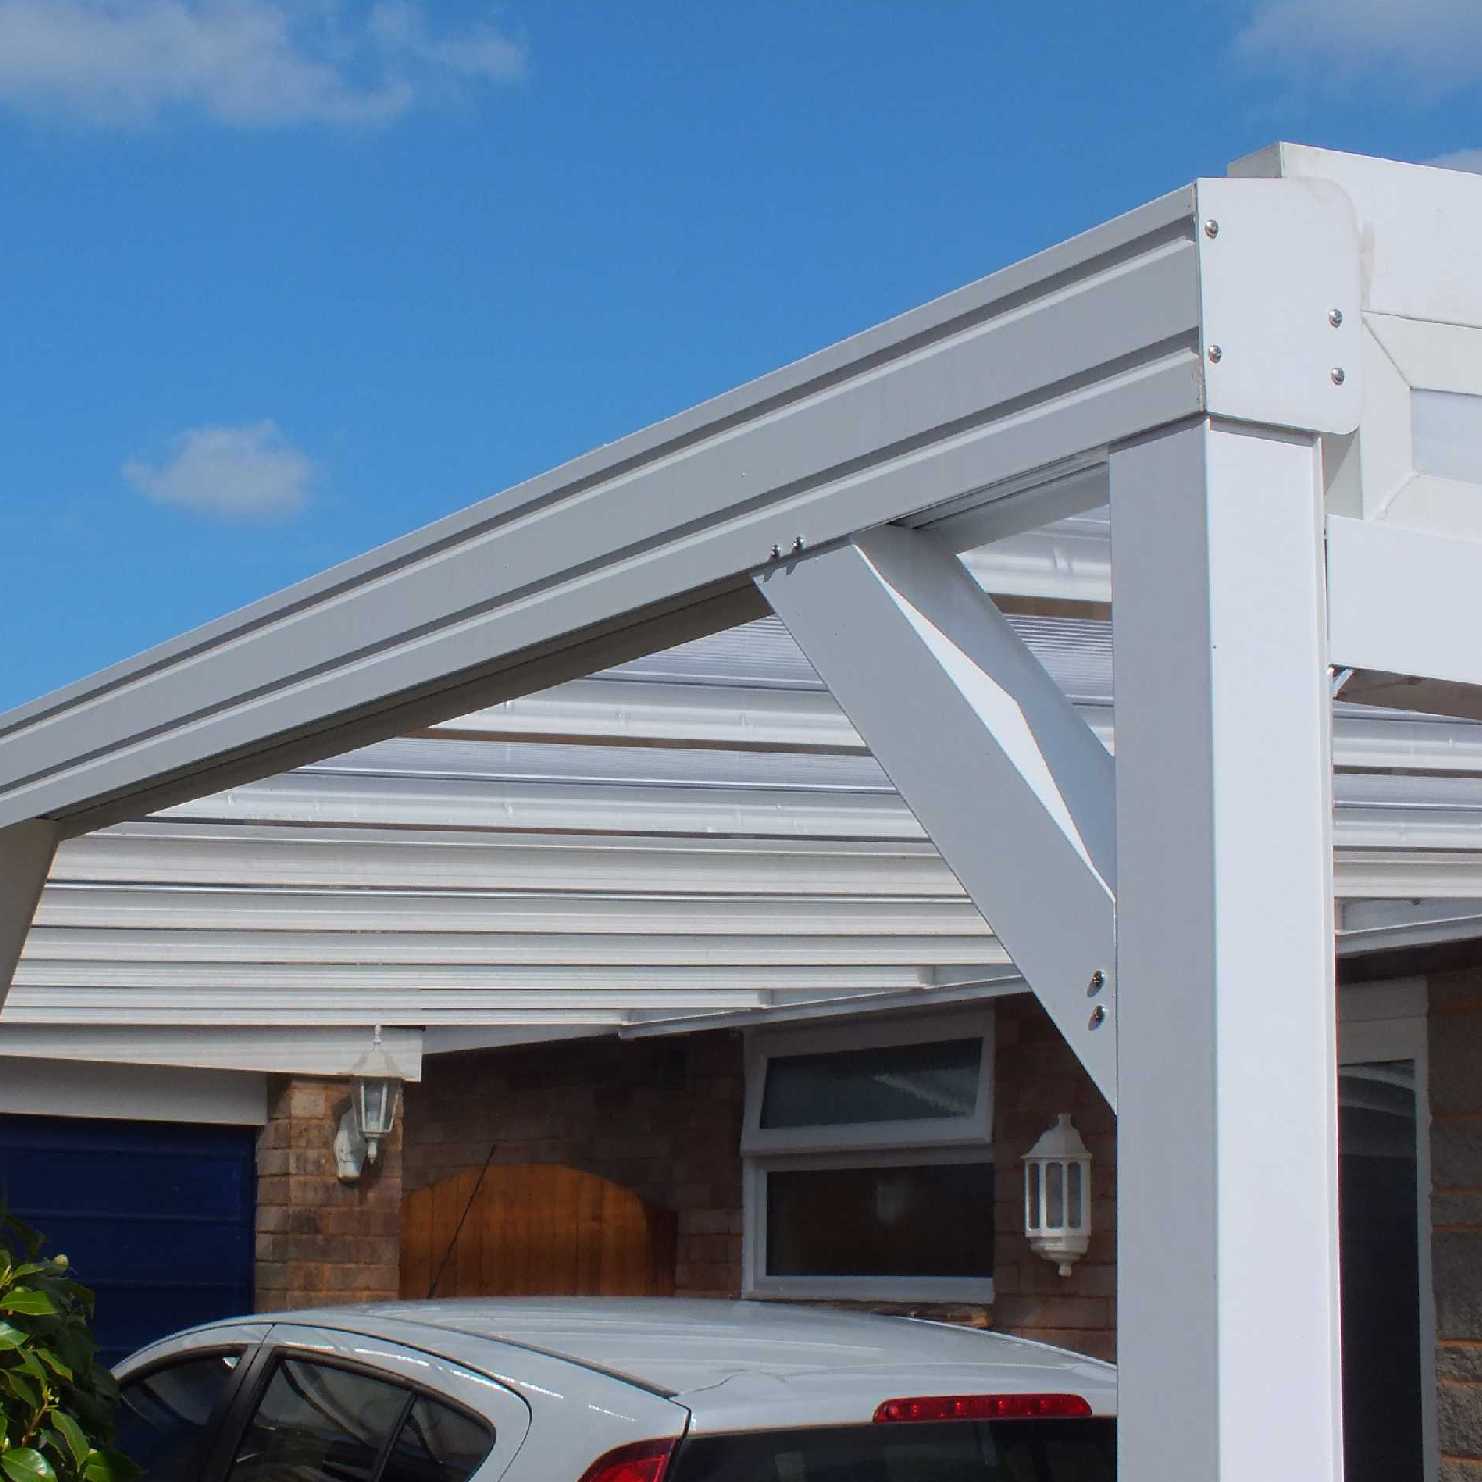 Buy Omega Smart Lean-To Canopy, White with 16mm Polycarbonate Glazing - 9.5m (W) x 2.5m (P), (5) Supporting Posts online today